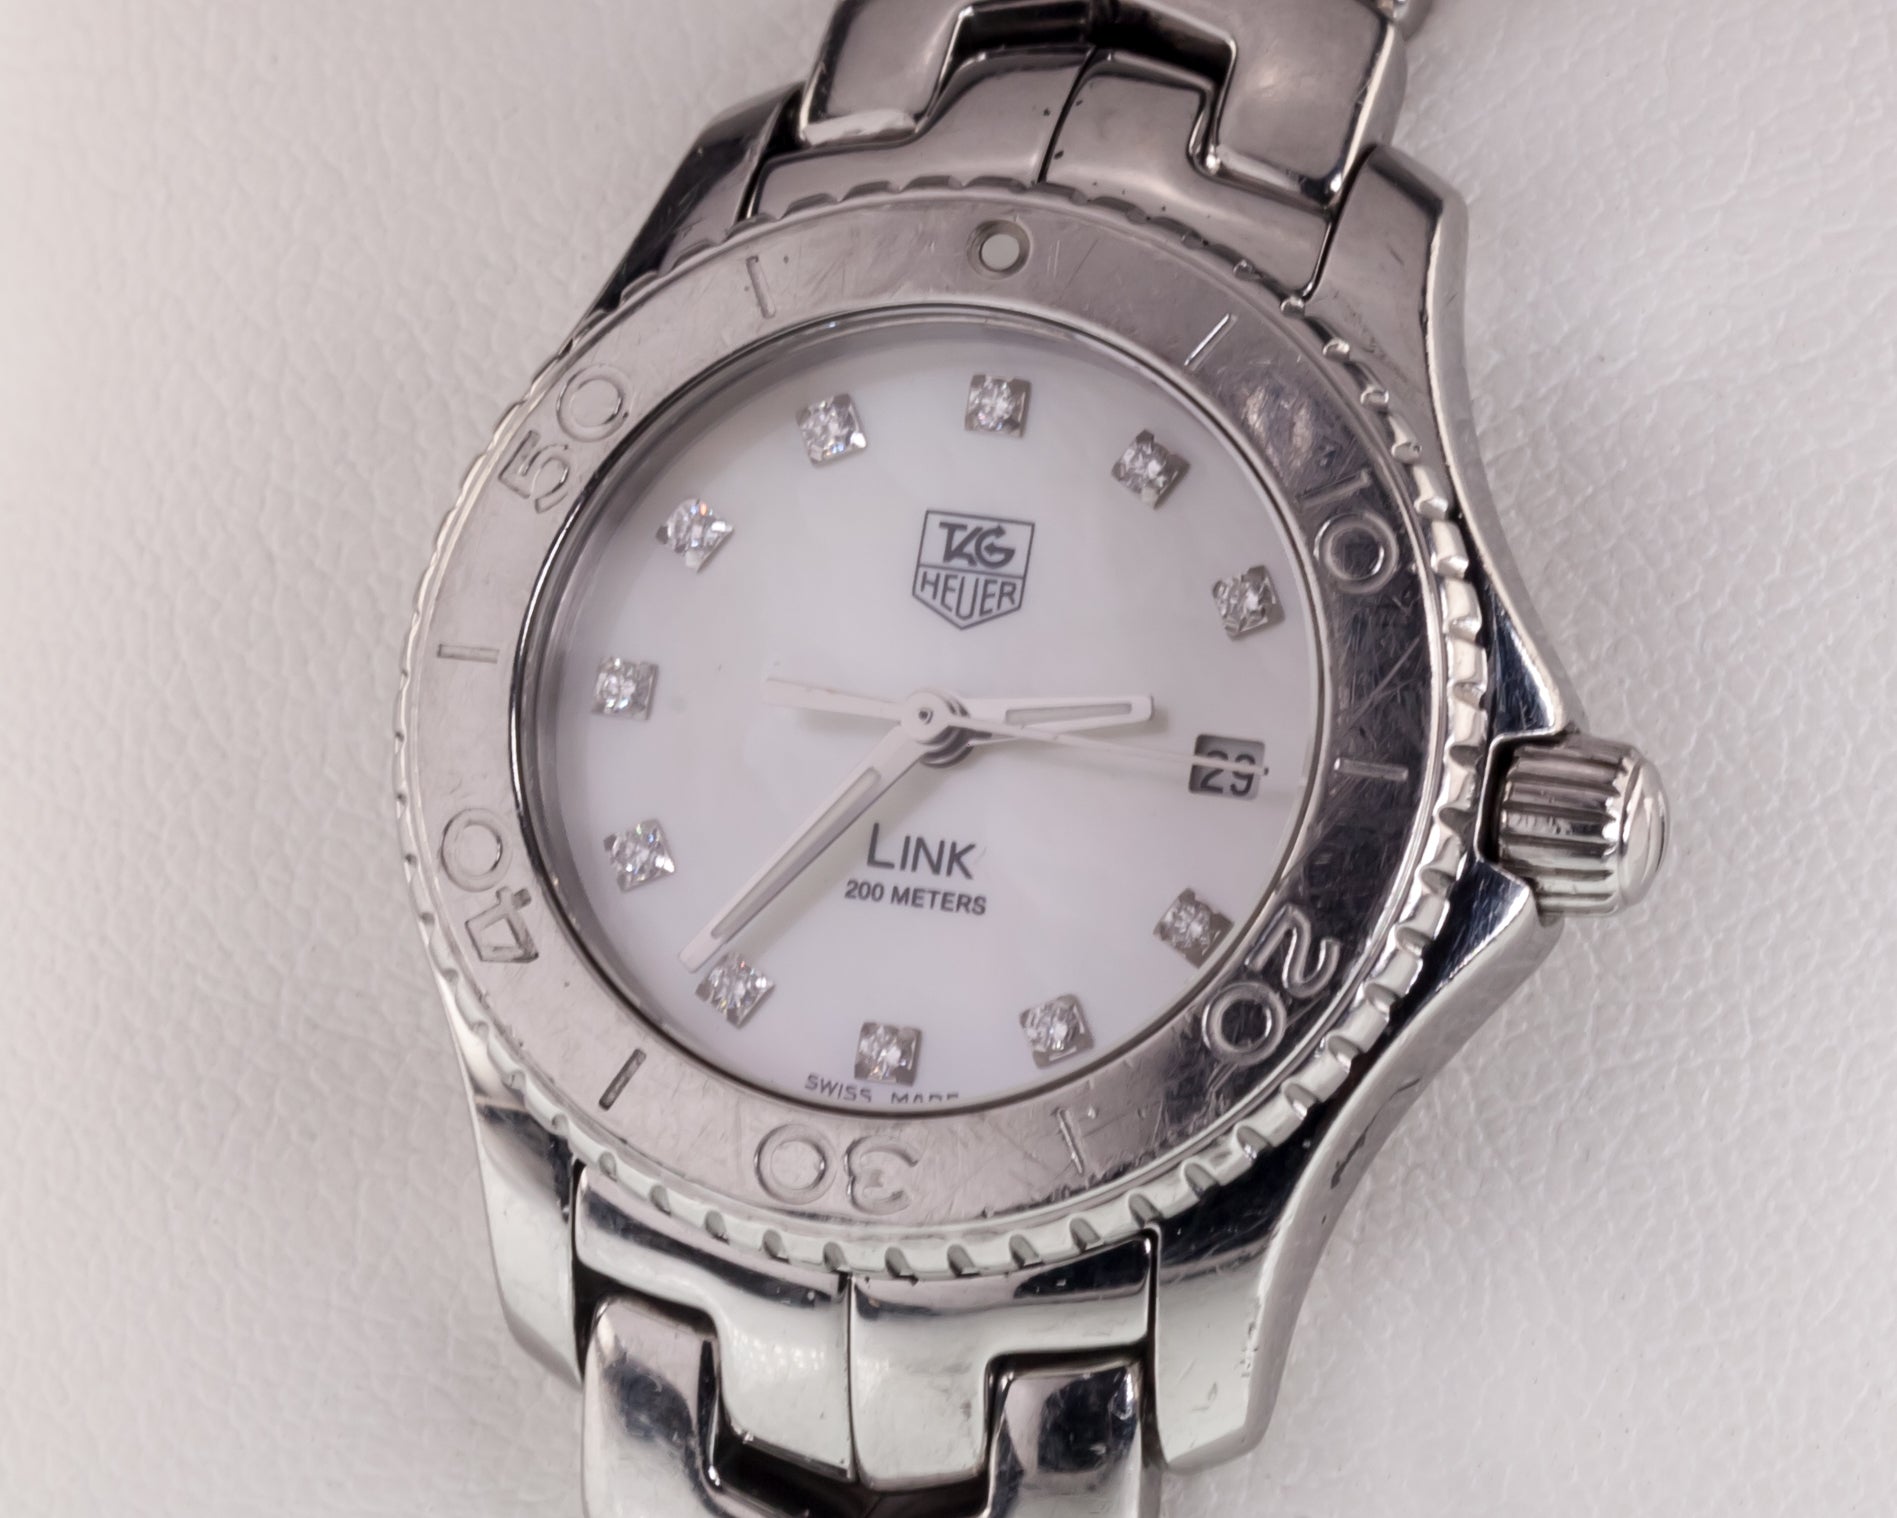 Tag Heuer Stainless Steel Women's Quartz Link Watch w/ MOP Diamond Dial WJ1319
Movement #f03111
Case #WJ1319_O_XE5925

Stainless Steel Round Case w/ Rotating Diver's Bezel
NOTE: Some scratches on bezel
25 mm in Diameter (29 mm w/ Crown)
Lug-to-Lug